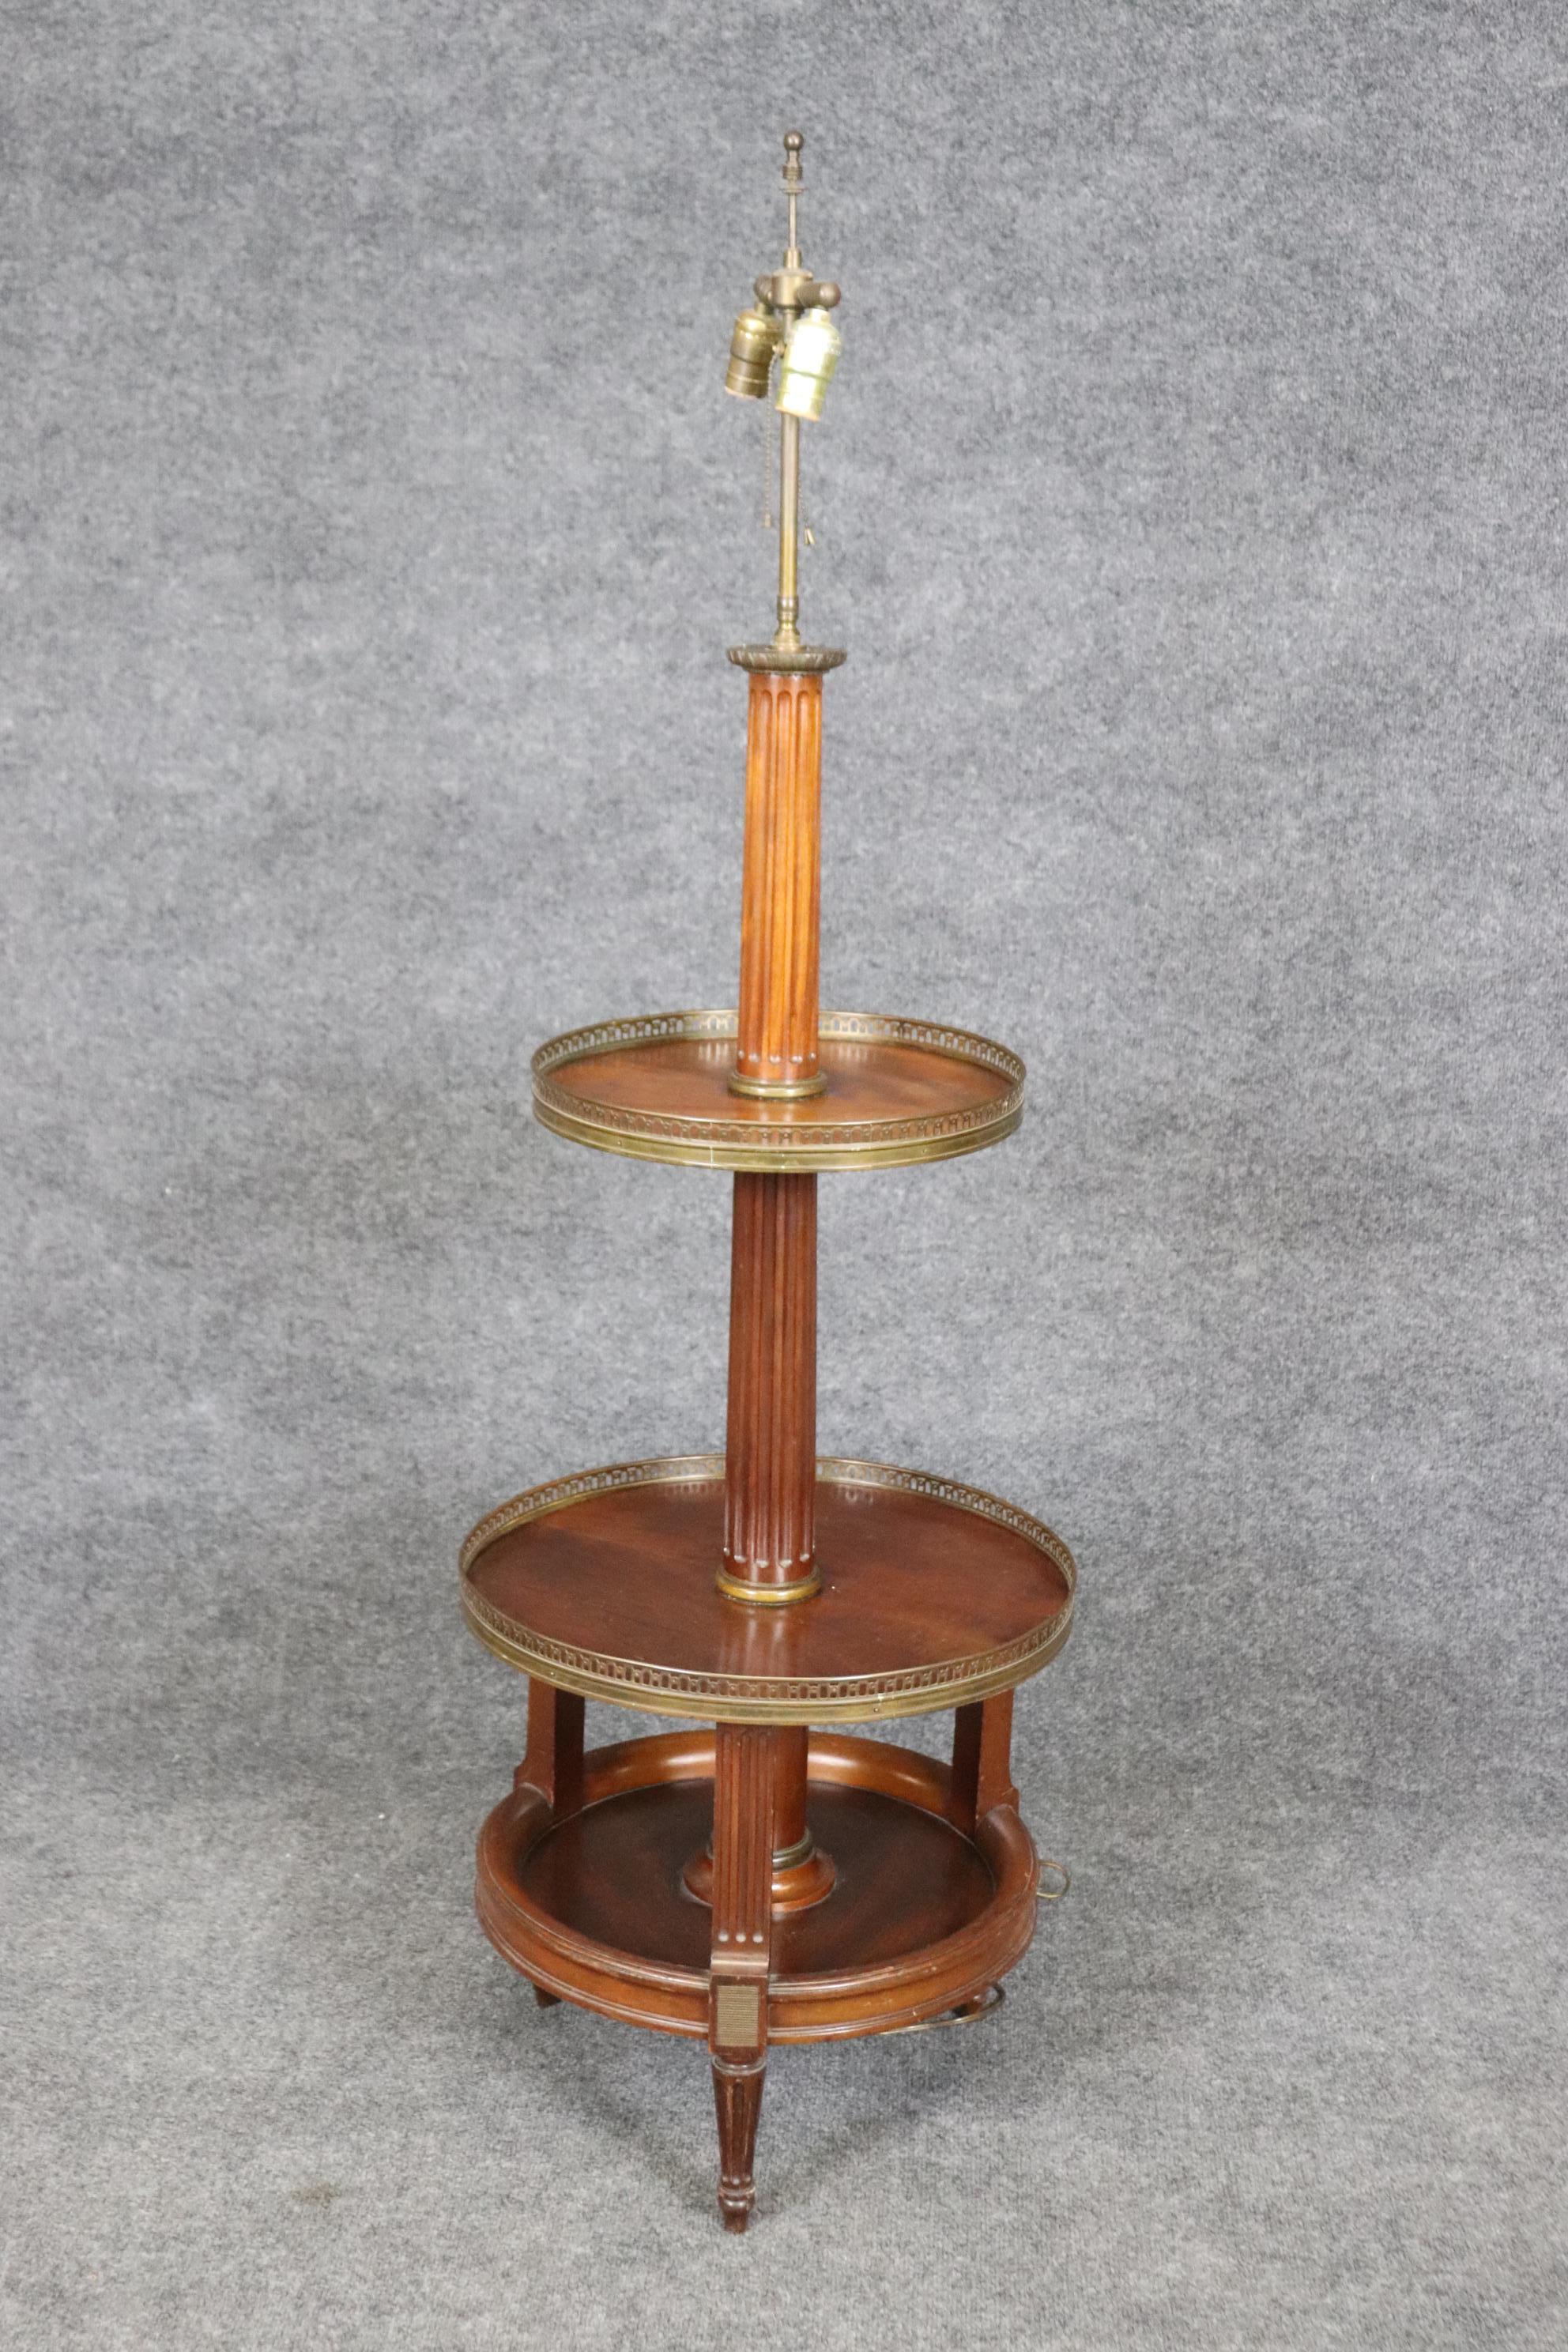 Mid-20th Century French Directoire Mahogany and Brass Mounted Floor Lamp with Shelves For Sale